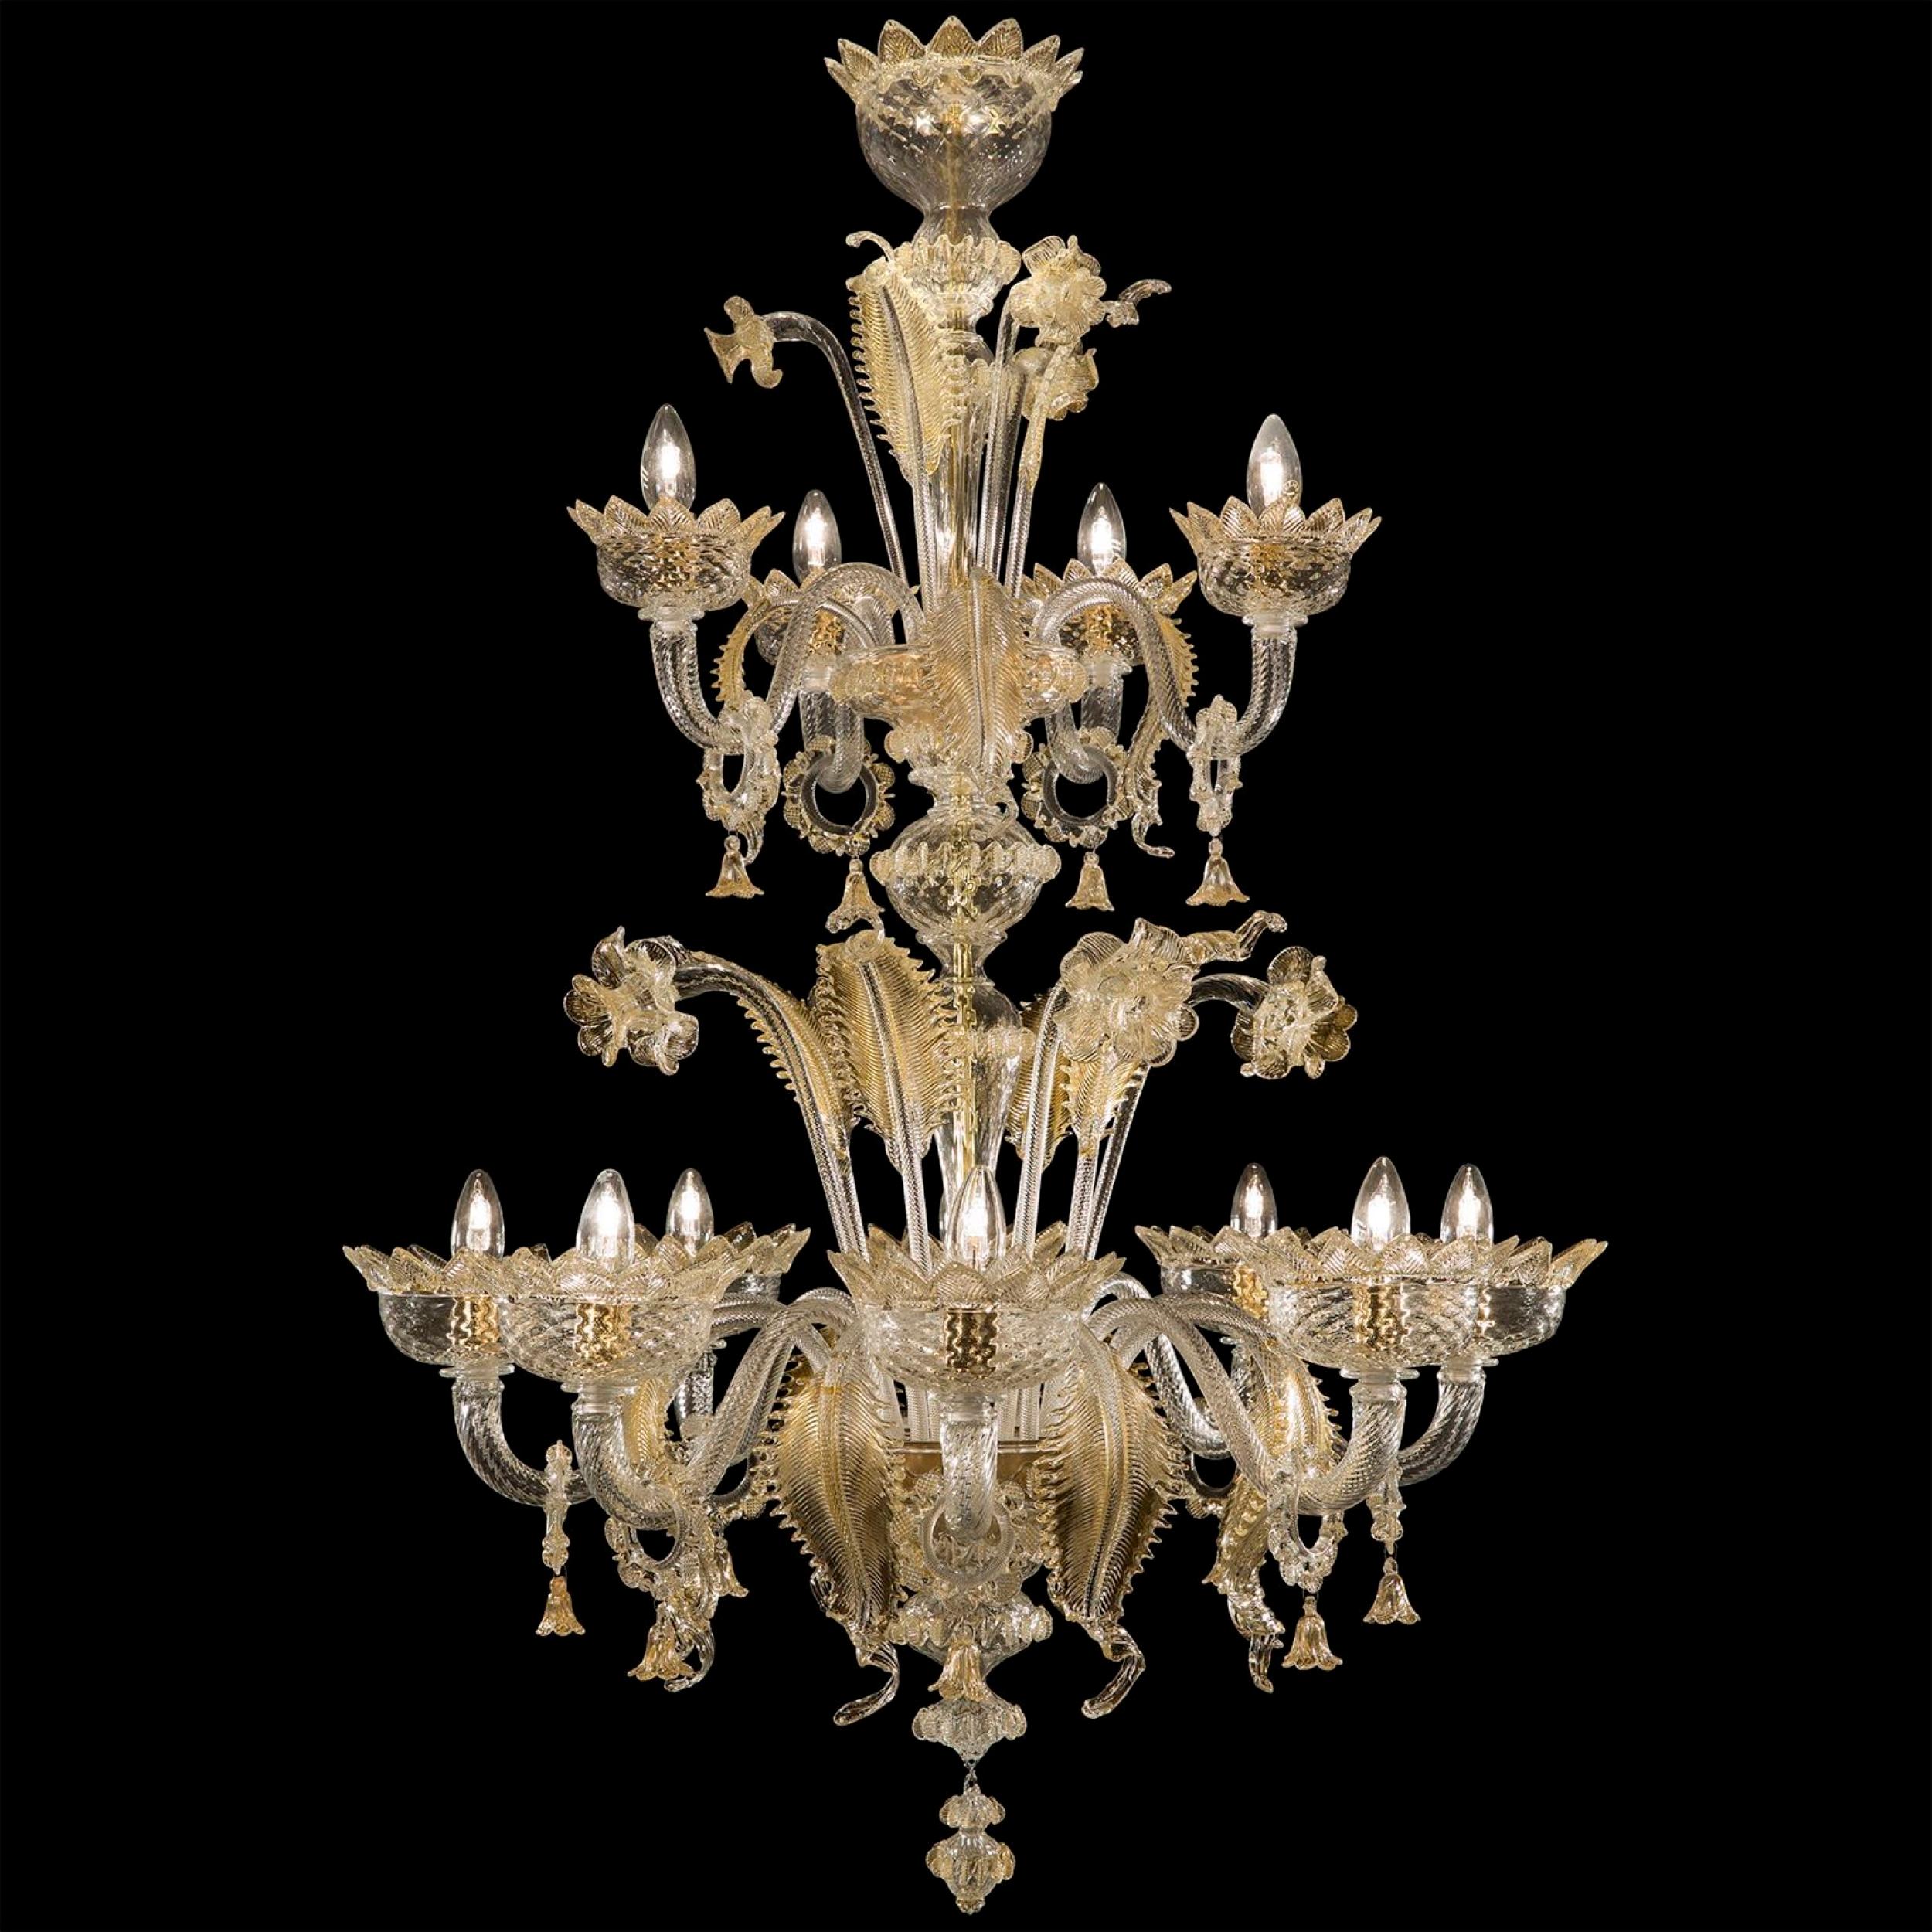 Classic chandelier 12 Arms clear and gold Murano Glass by Multiforme.
The classic Murano glass chandelier, as it is in the collective imagination. As many other chandeliers in our collections, V-Classic 800 is designed with attention to details, and